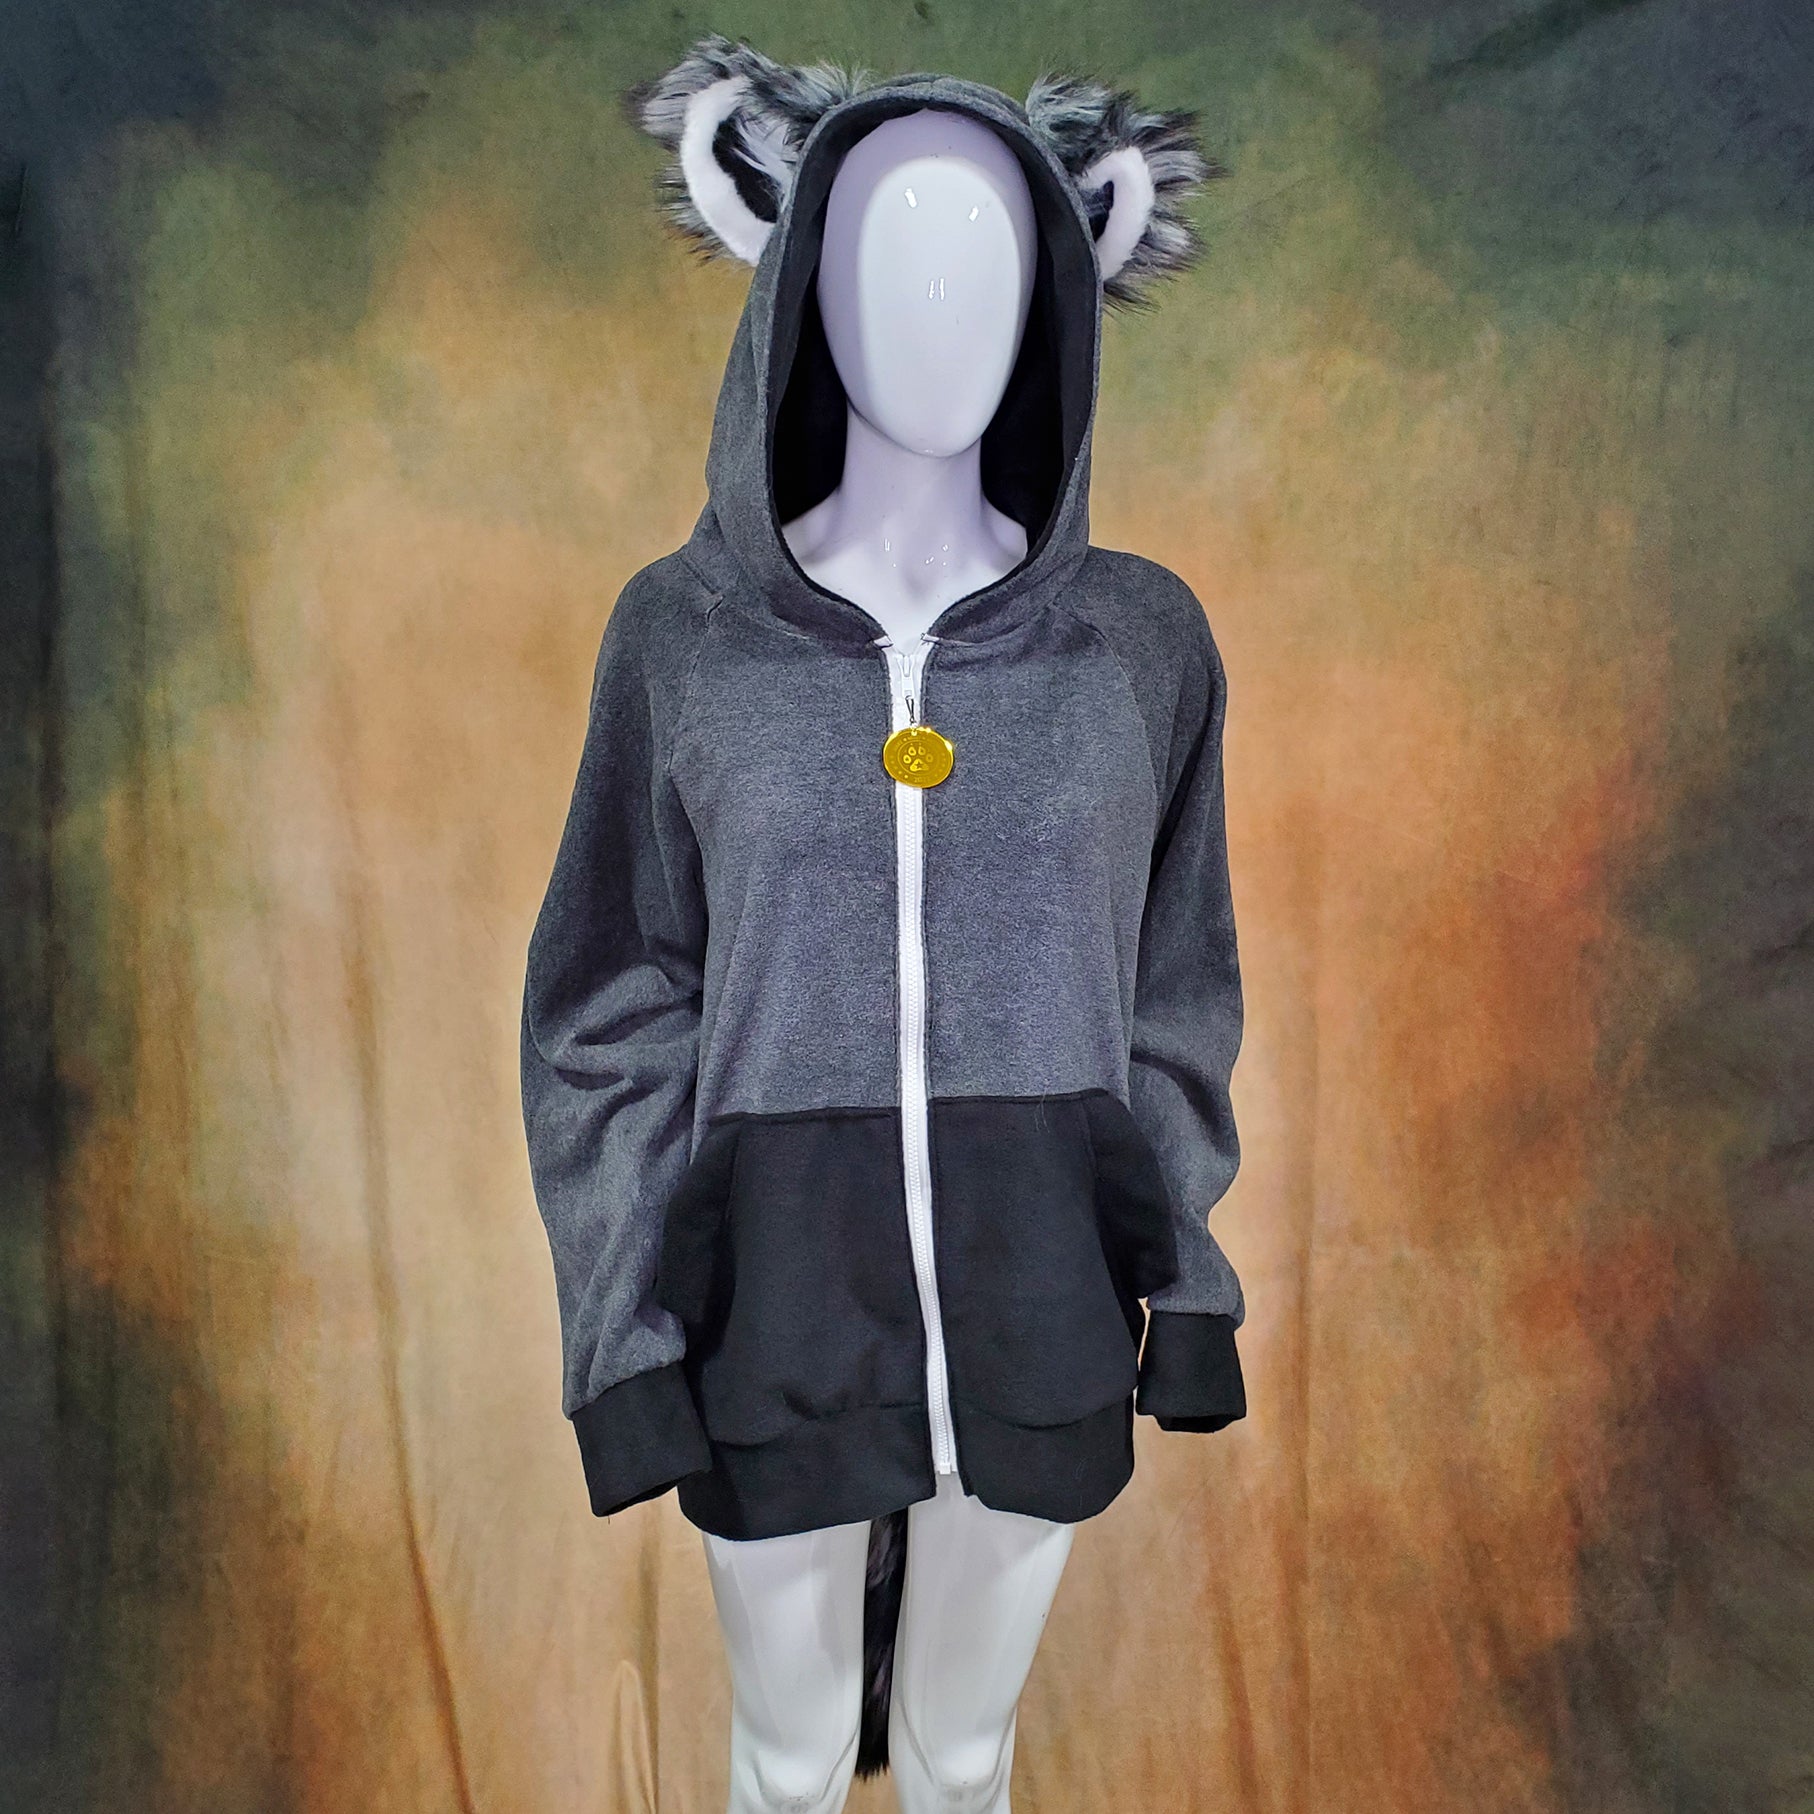 Raccoon Hoodie - Pawstar Pawstar clothing cosplay, costume, furry, hoodie, limited, ship-15, ship-30day, ship-5day